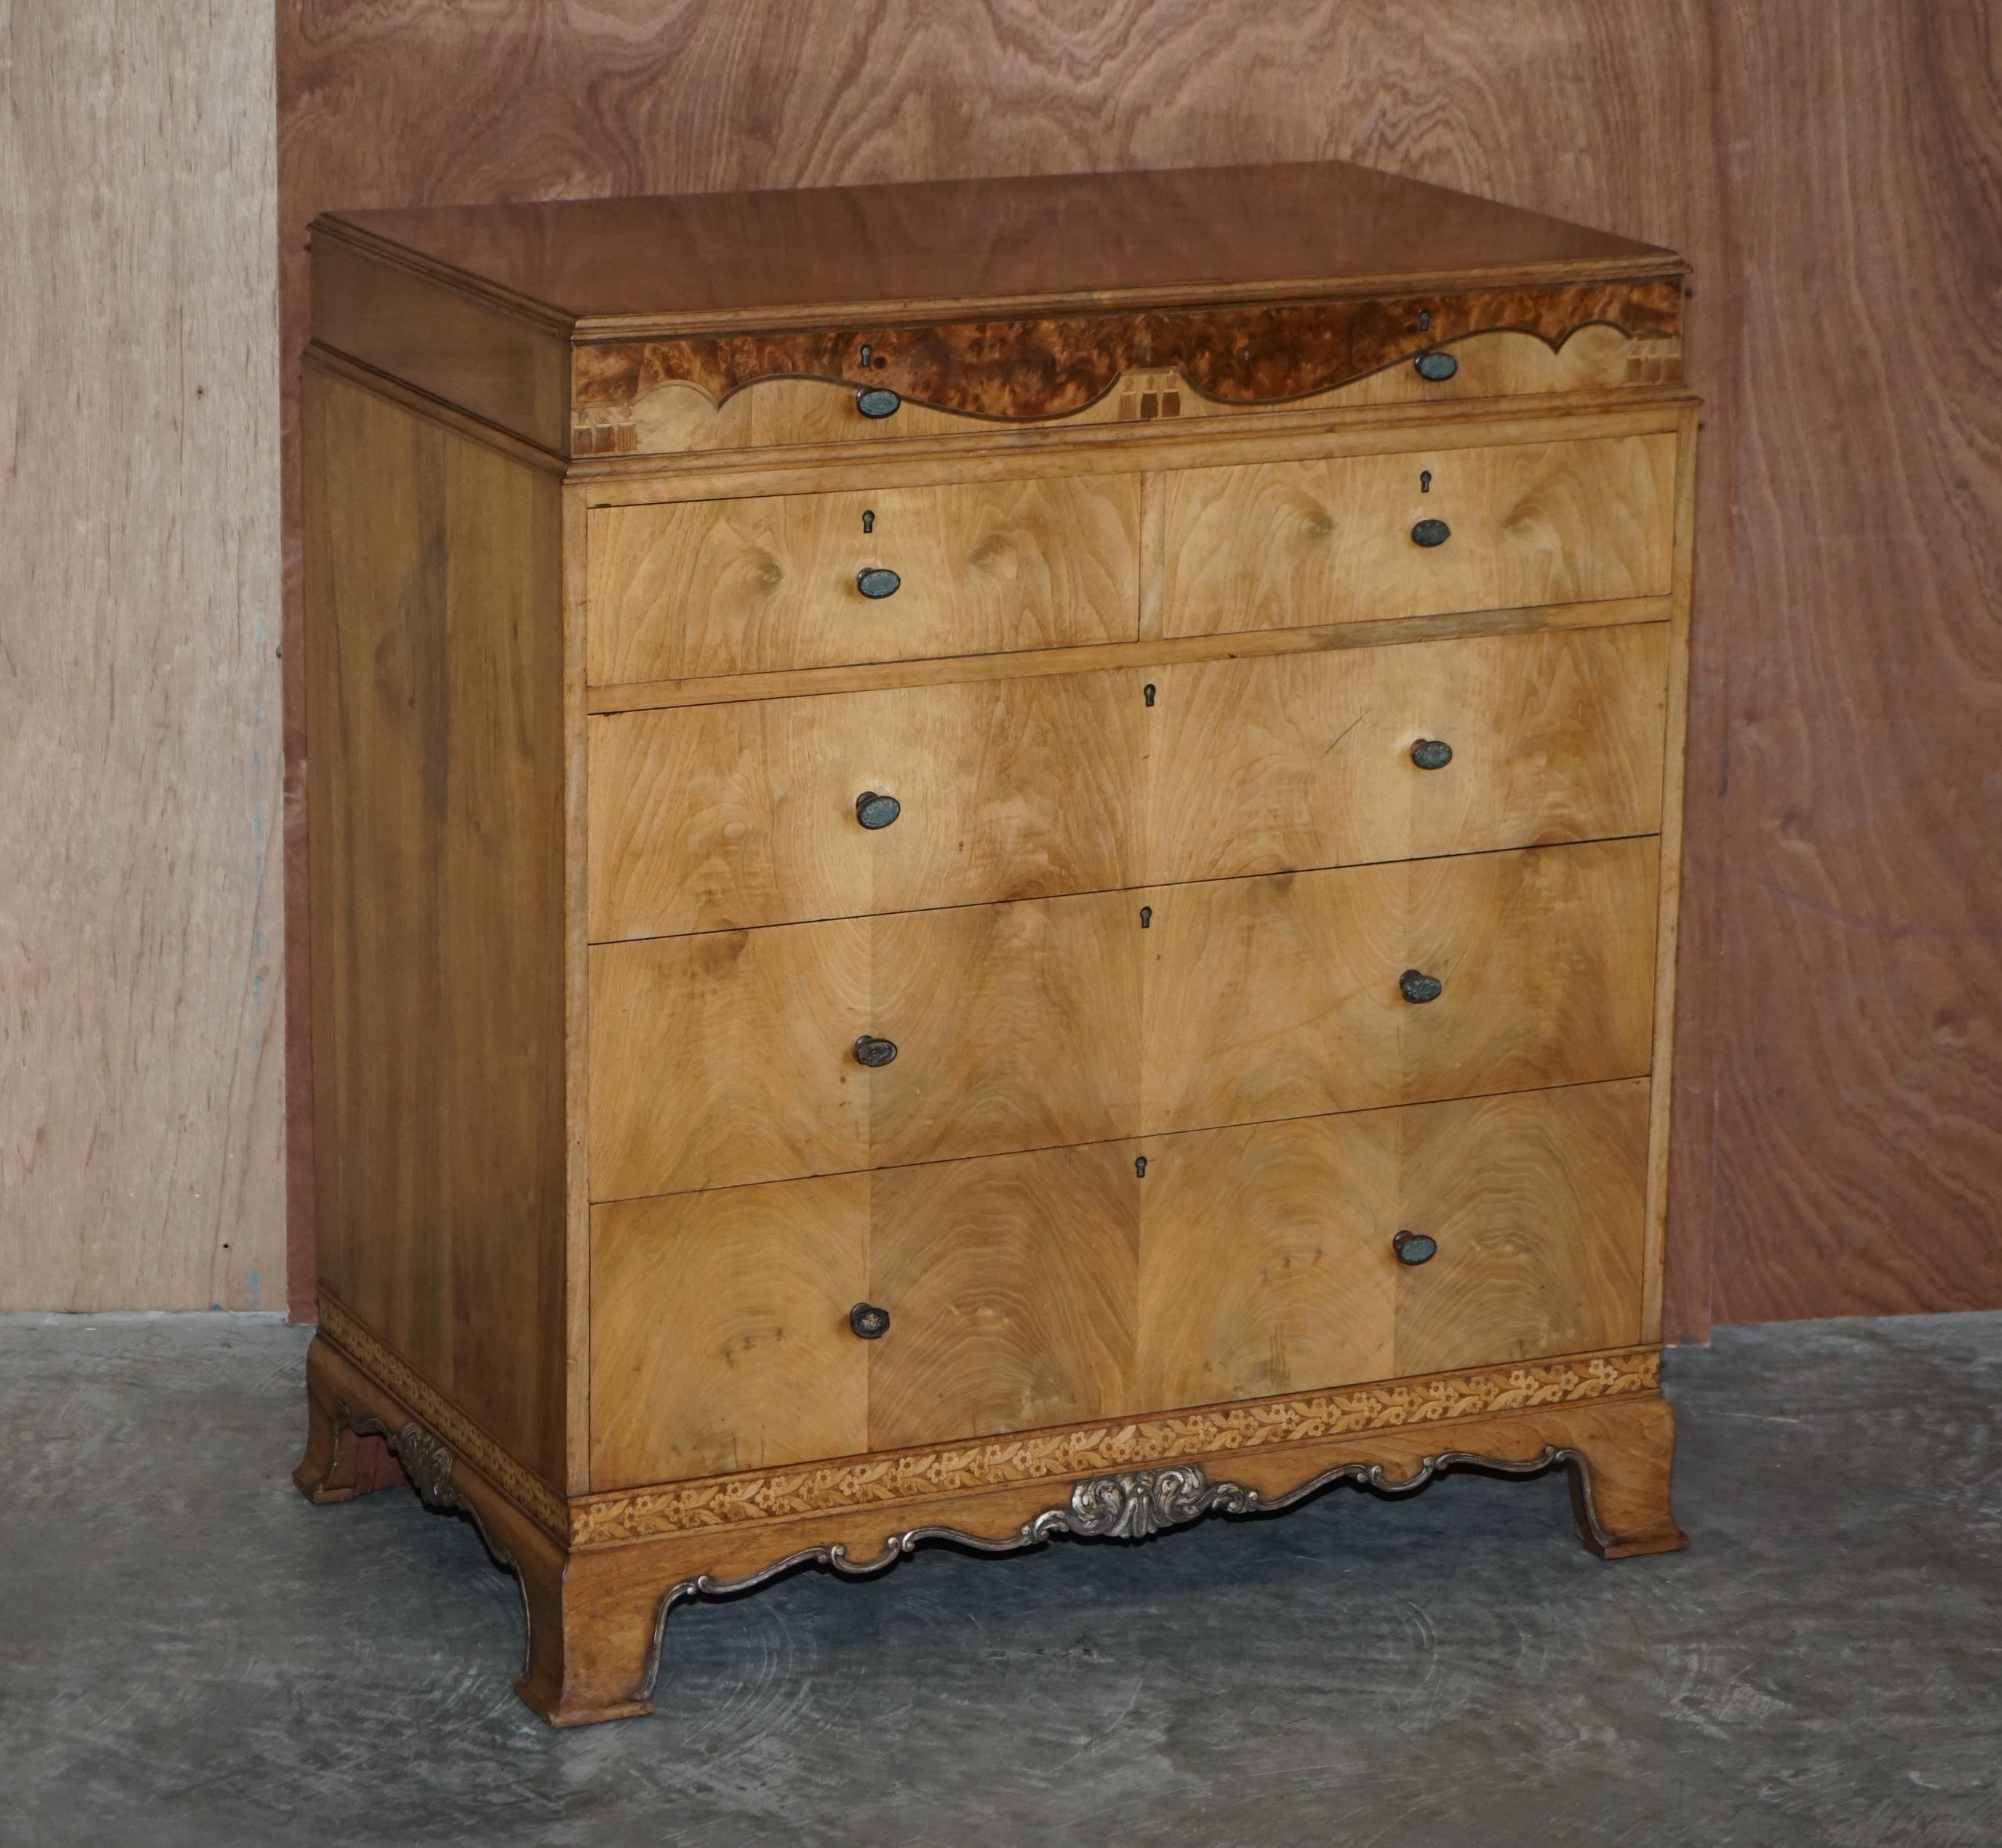 We are delighted to offer for sale this finest quality Waring & Gillow Lancaster, Burr Walnut inlaid chest of drawers which is part of a suite

This piece is part of a bedroom set, I have in total a triple bank wardrobe, dressing table with